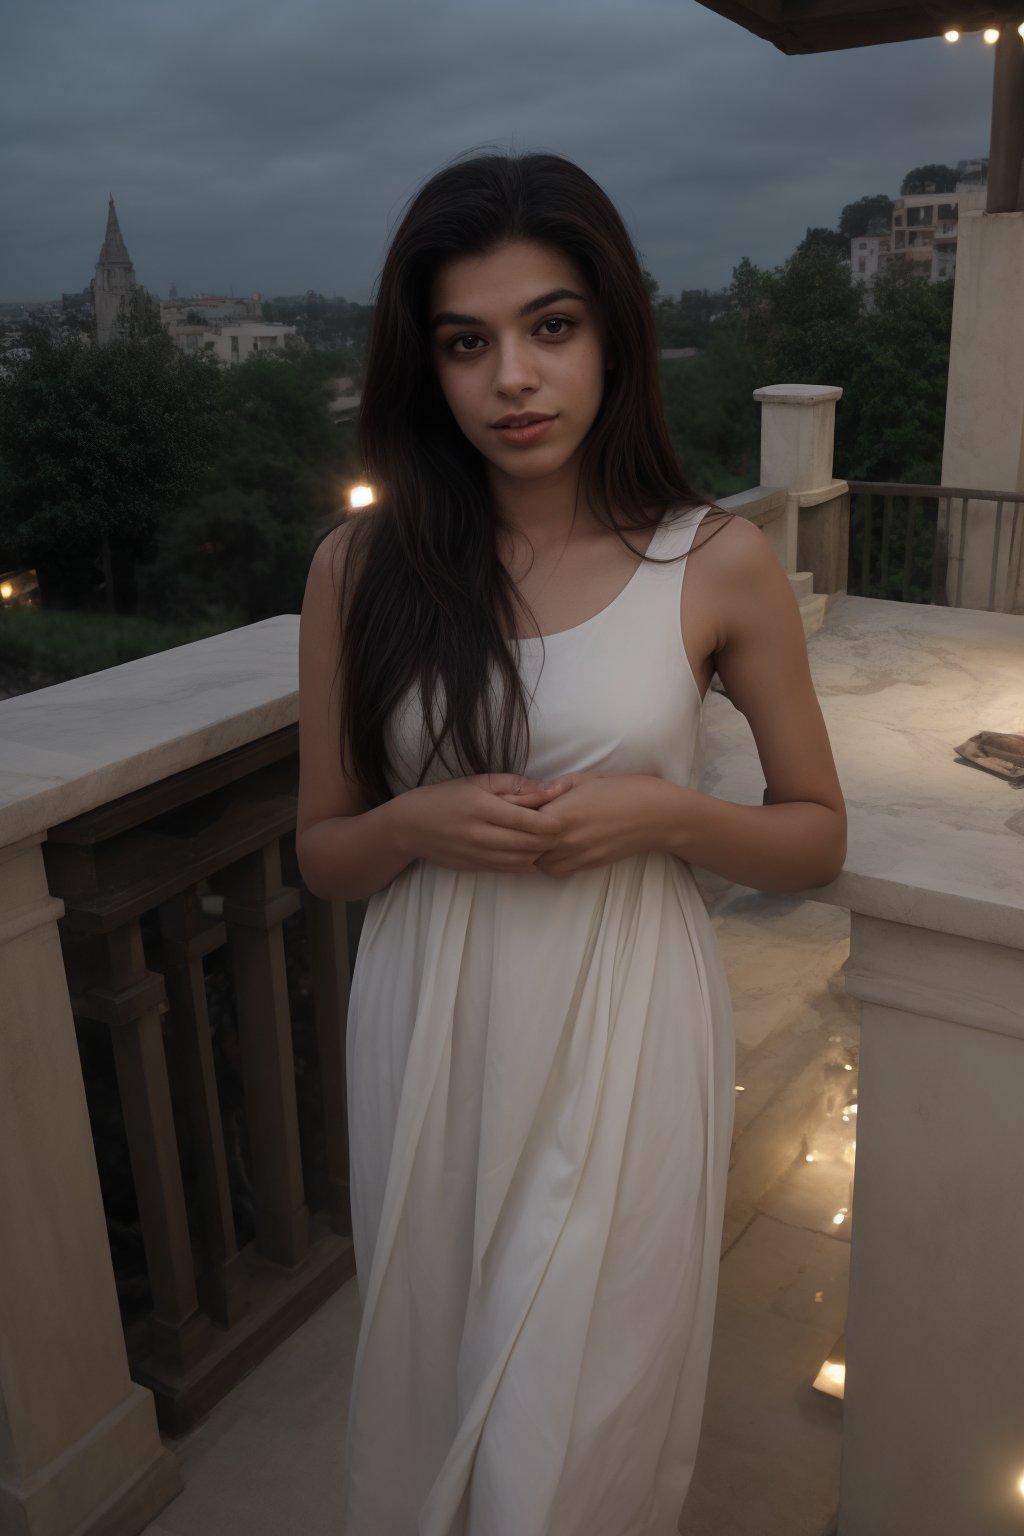 A stunning young woman with long, gazes directly into the camera lens. Her dark skin glows warmly in the soft light as she stands poised on a balcony railing, wearing a flowing white dress that seems to shimmer in the gentle illumination. Her eyes sparkle with an air of confidence and poise.,Plump 